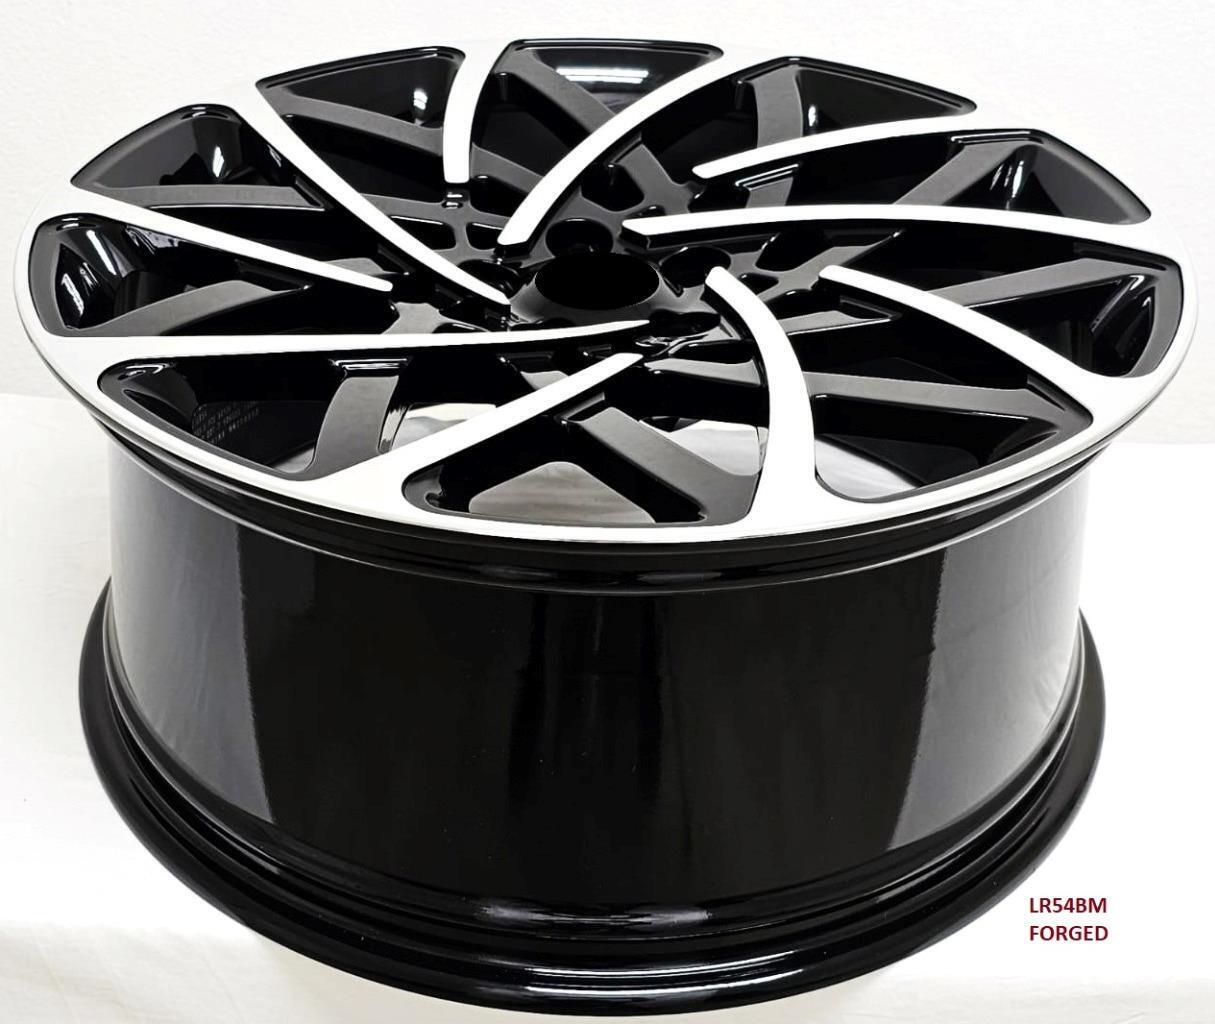 22" FORGED wheels for LAND ROVER DEFENDER FIRST EDITION 2020 & UP 22X9.5" 5x120